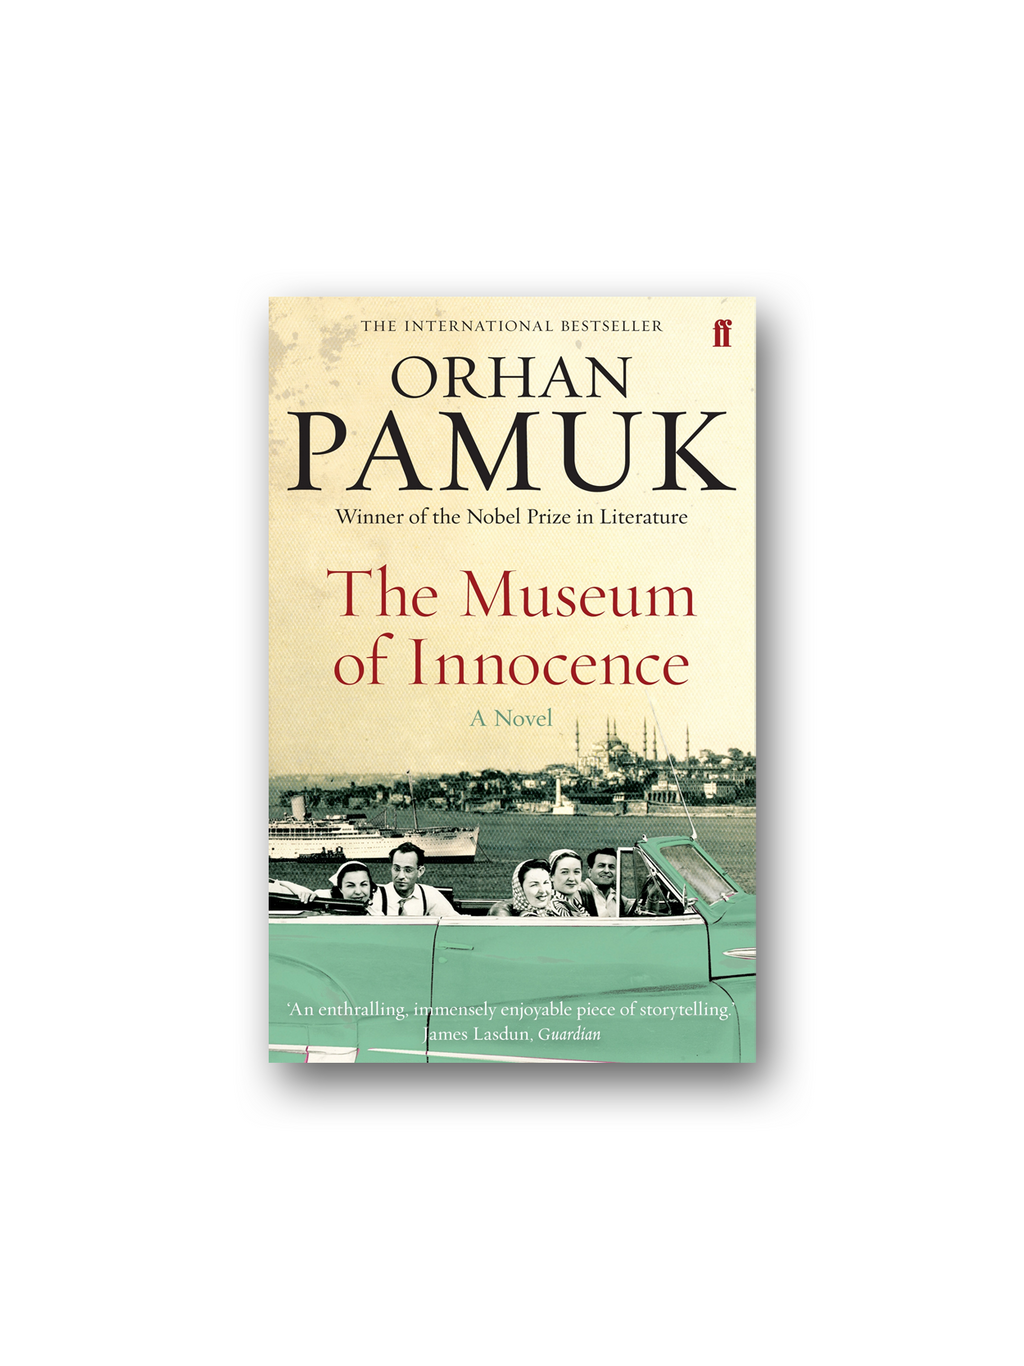 The Museum of Innocence: A Novel